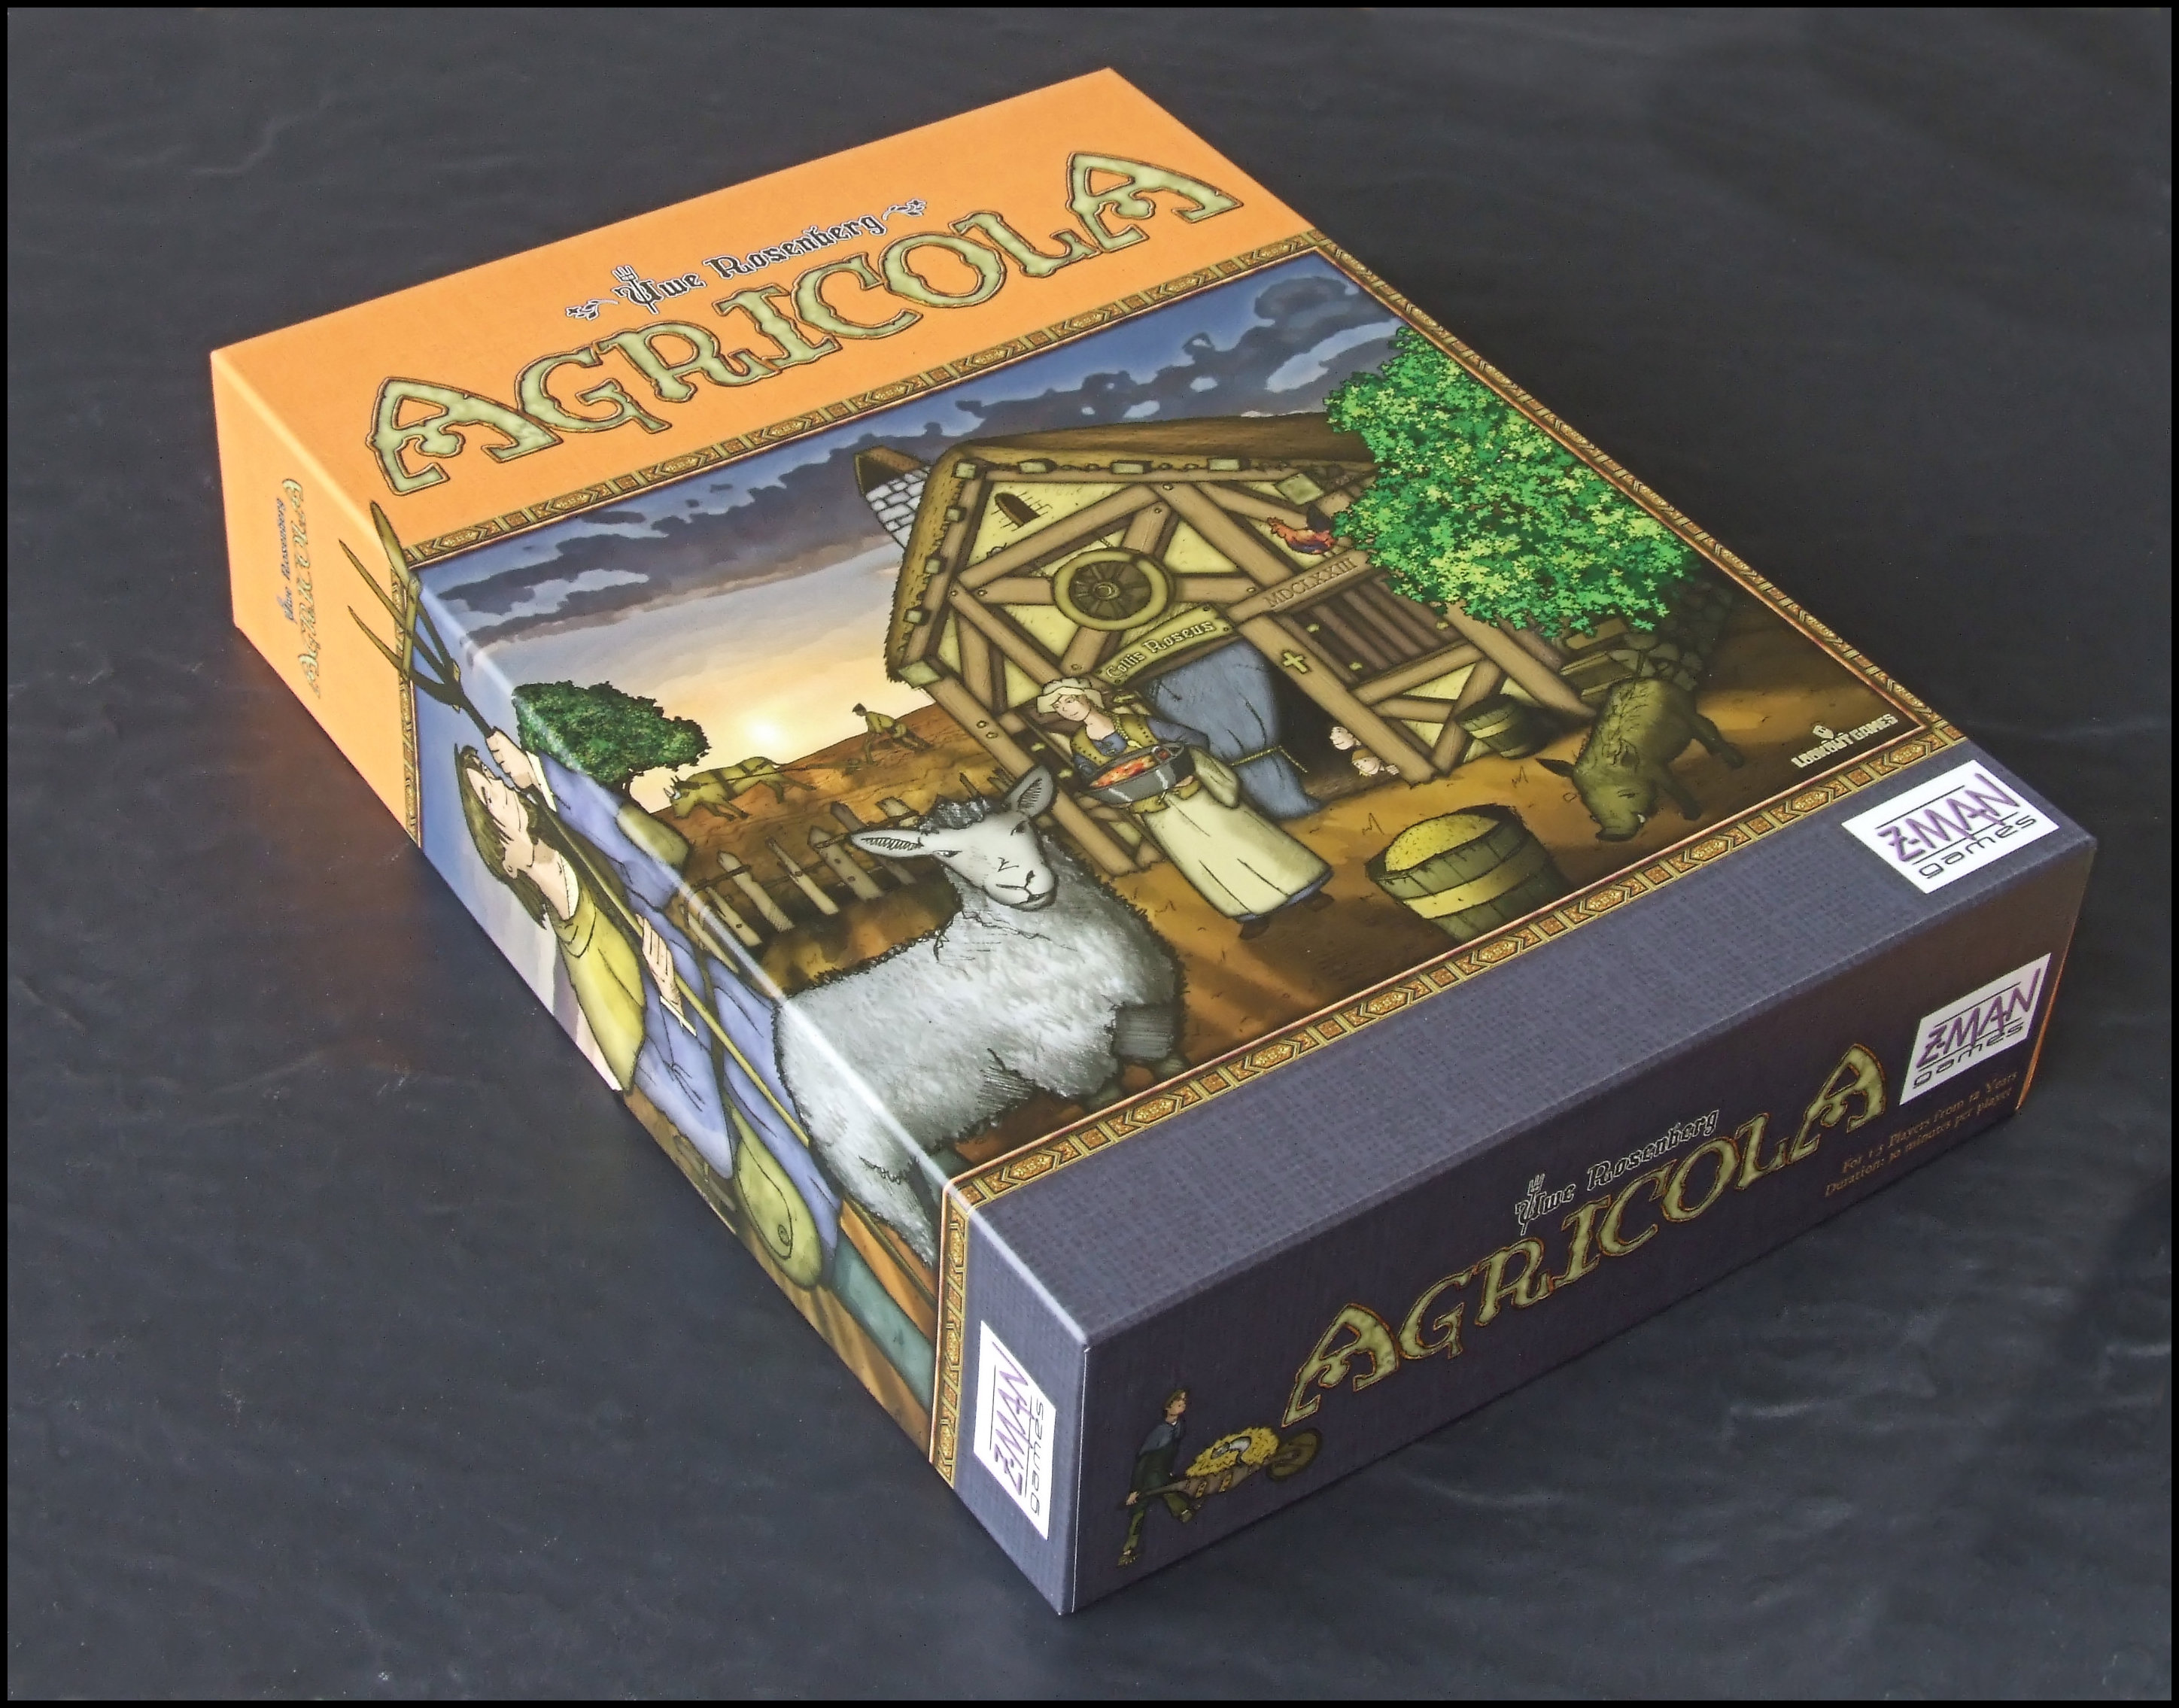 Agricola - Box, Isometric View (Z-Man Games)